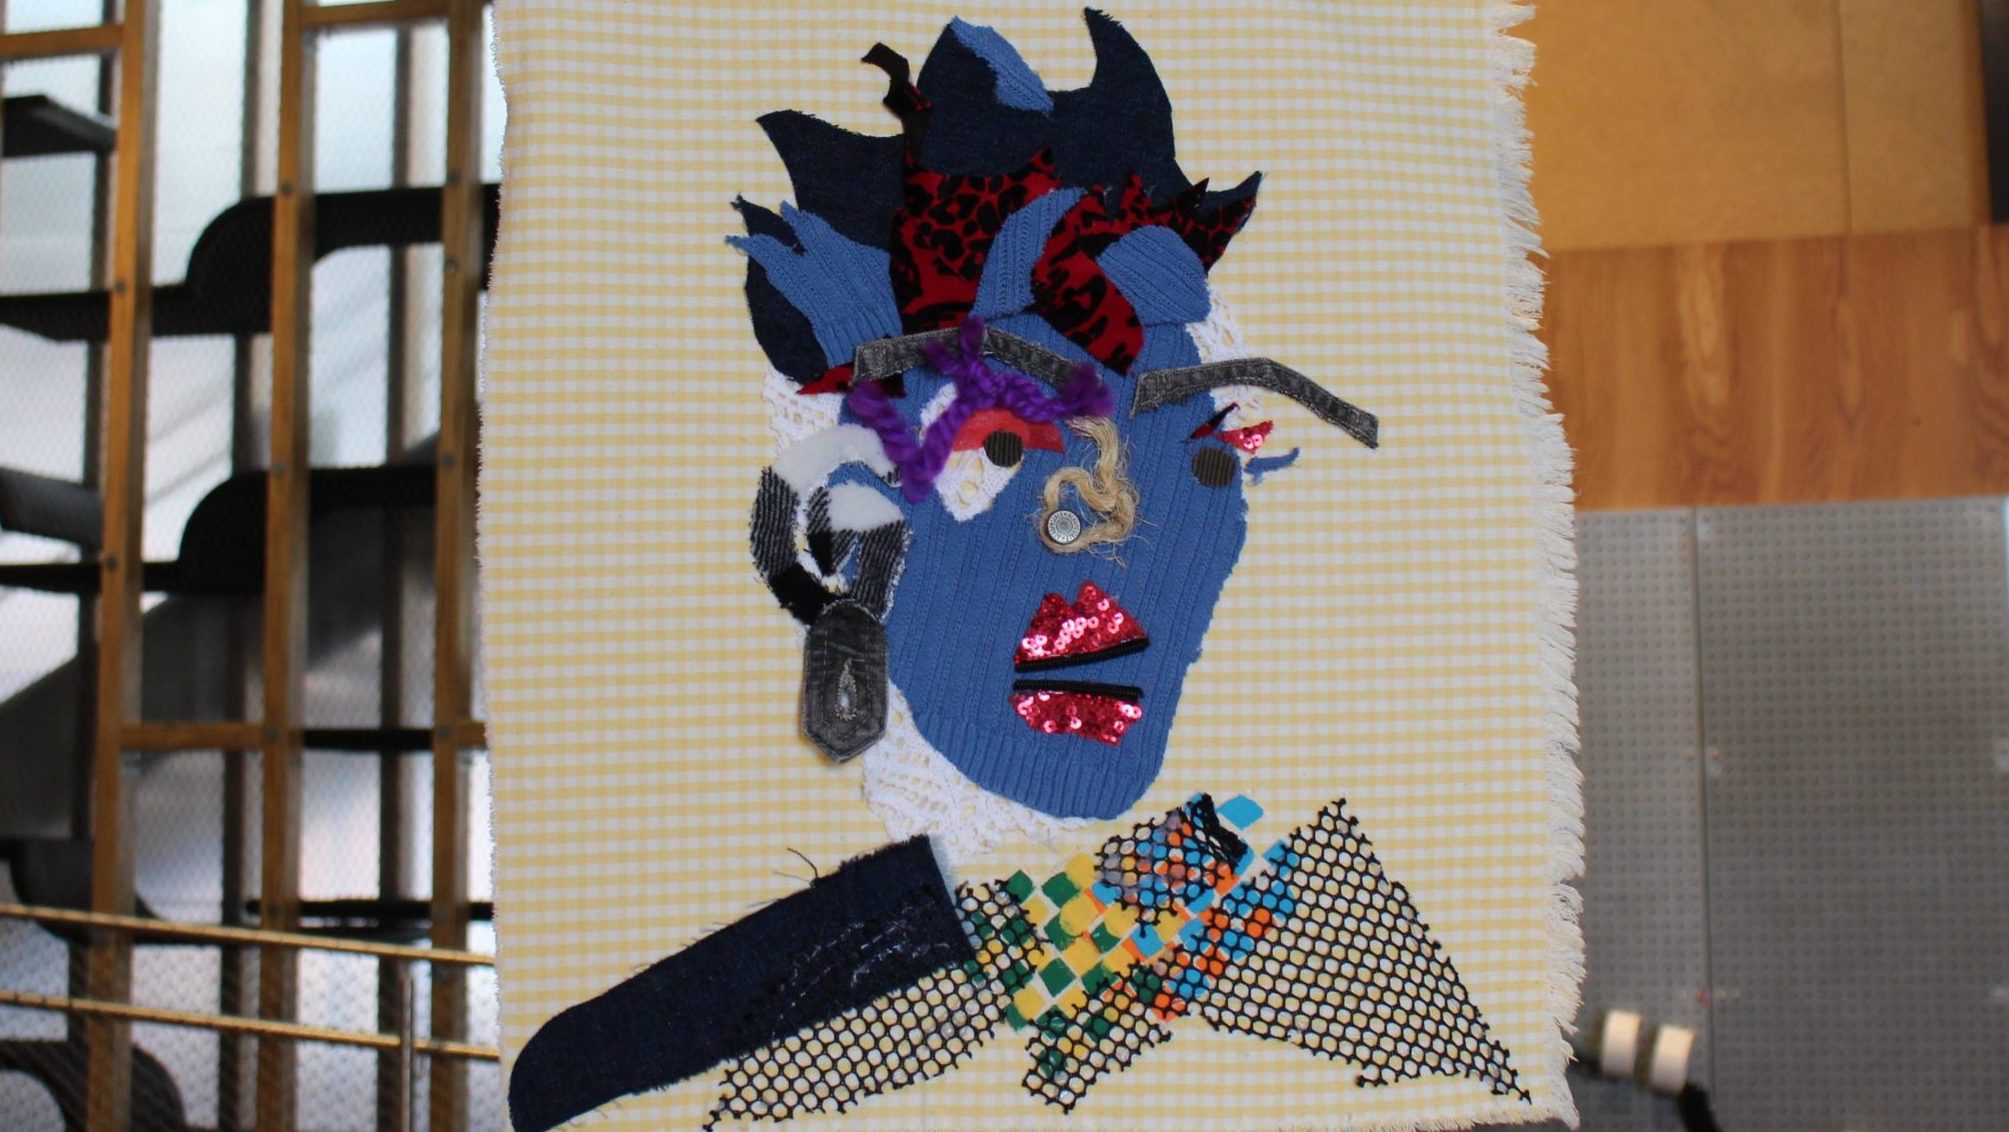 A colorful fabric collage of a face with blue skin, wild hair, shining lips and many visual and physical textures